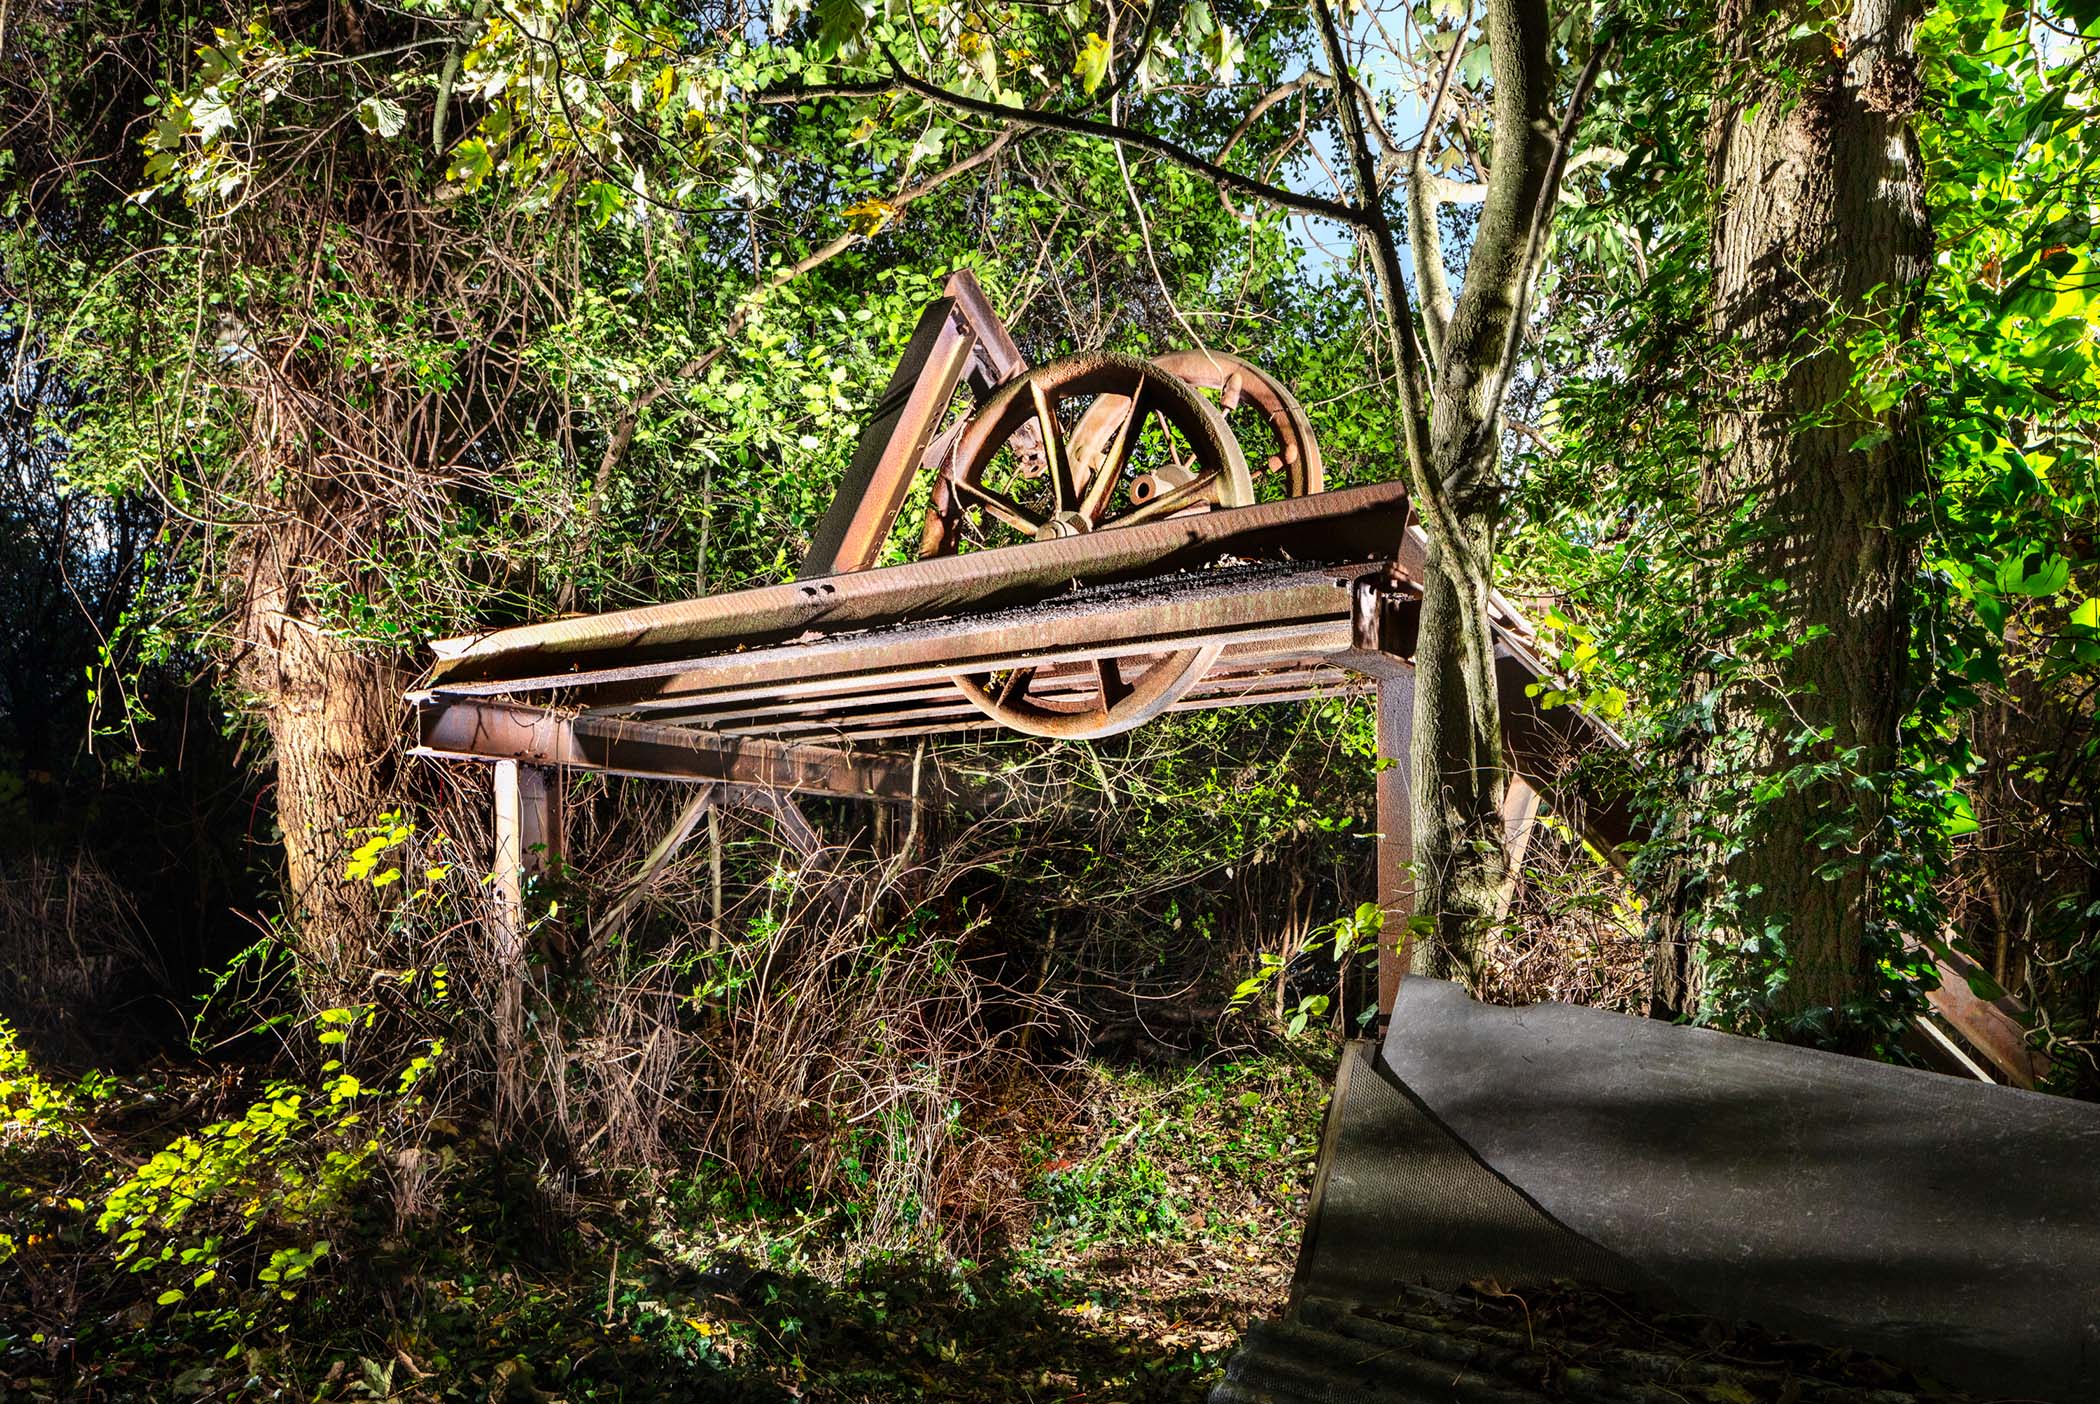 View of a former colliery's headgear surrounded by overgrown trees and bushes